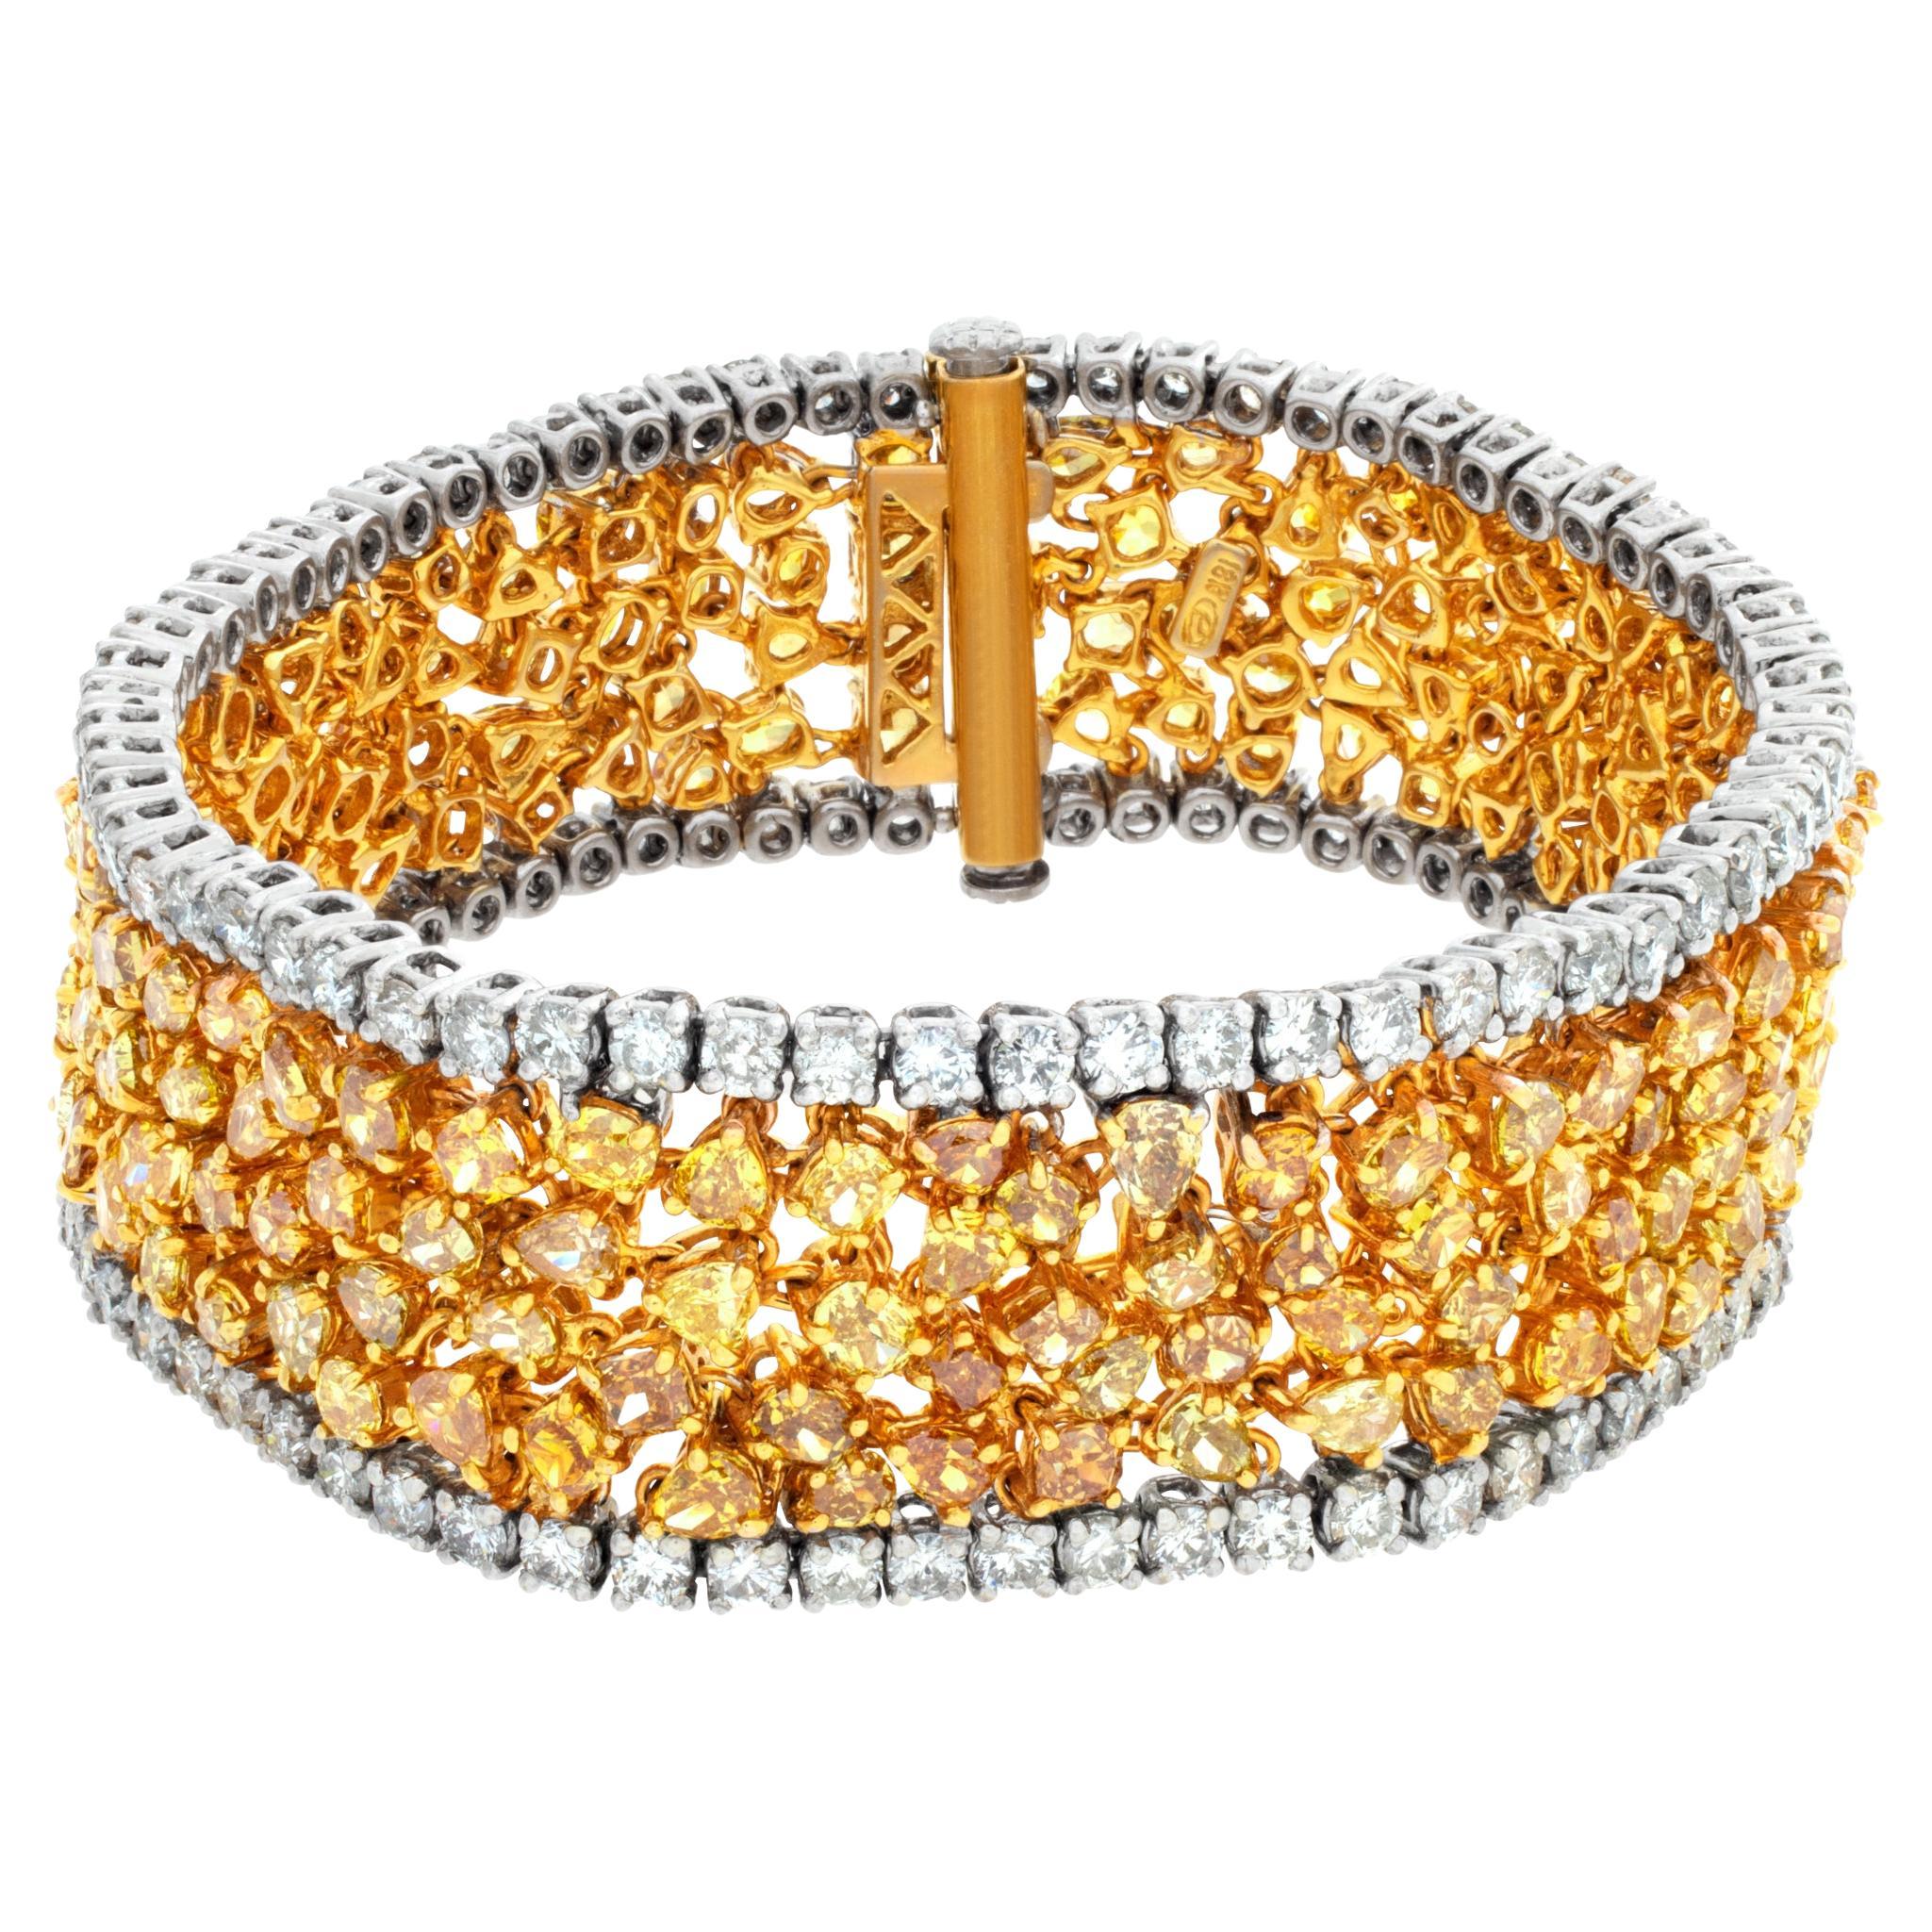 18k white and yellow gold bracelet with white and fancy diamonds